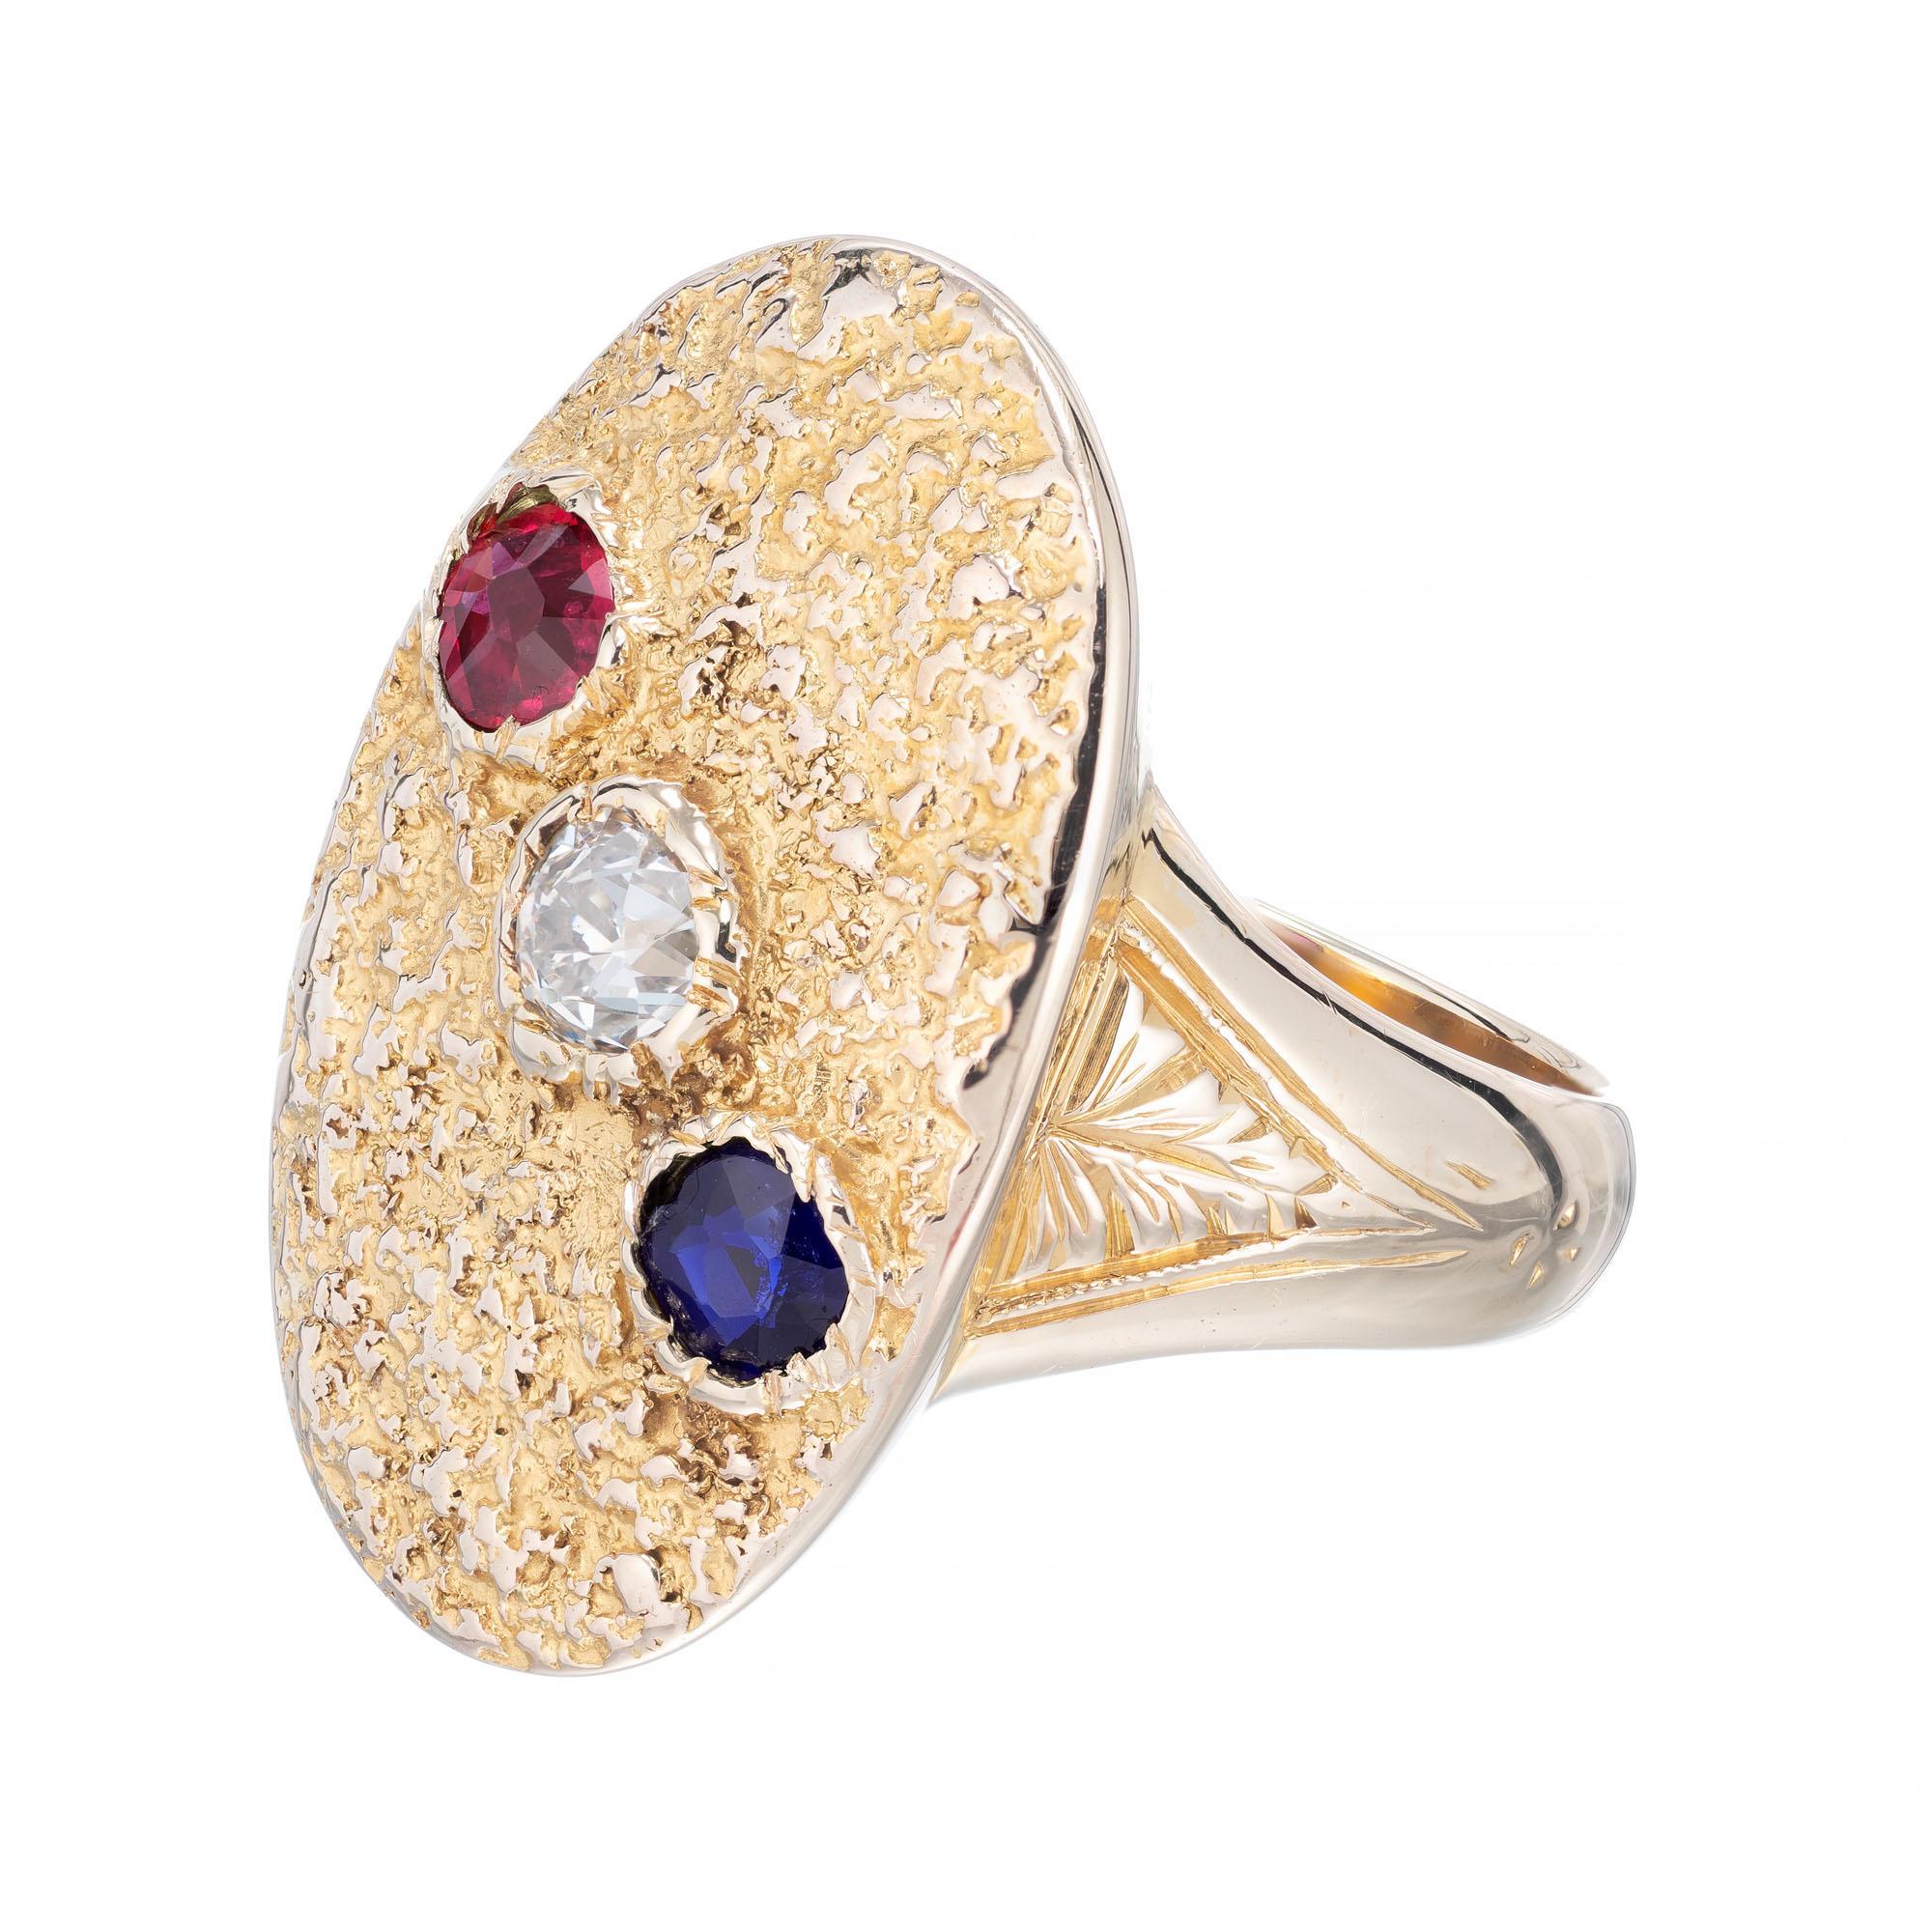 Victorian handmade late 1800's to early 1900’s signet style pinkie ring with textured top set with one round ruby, round diamond and a round sapphire, in a 14k yellow gold setting. 

1 old European cut diamond, approx. total weight .20cts, H, SI1
1